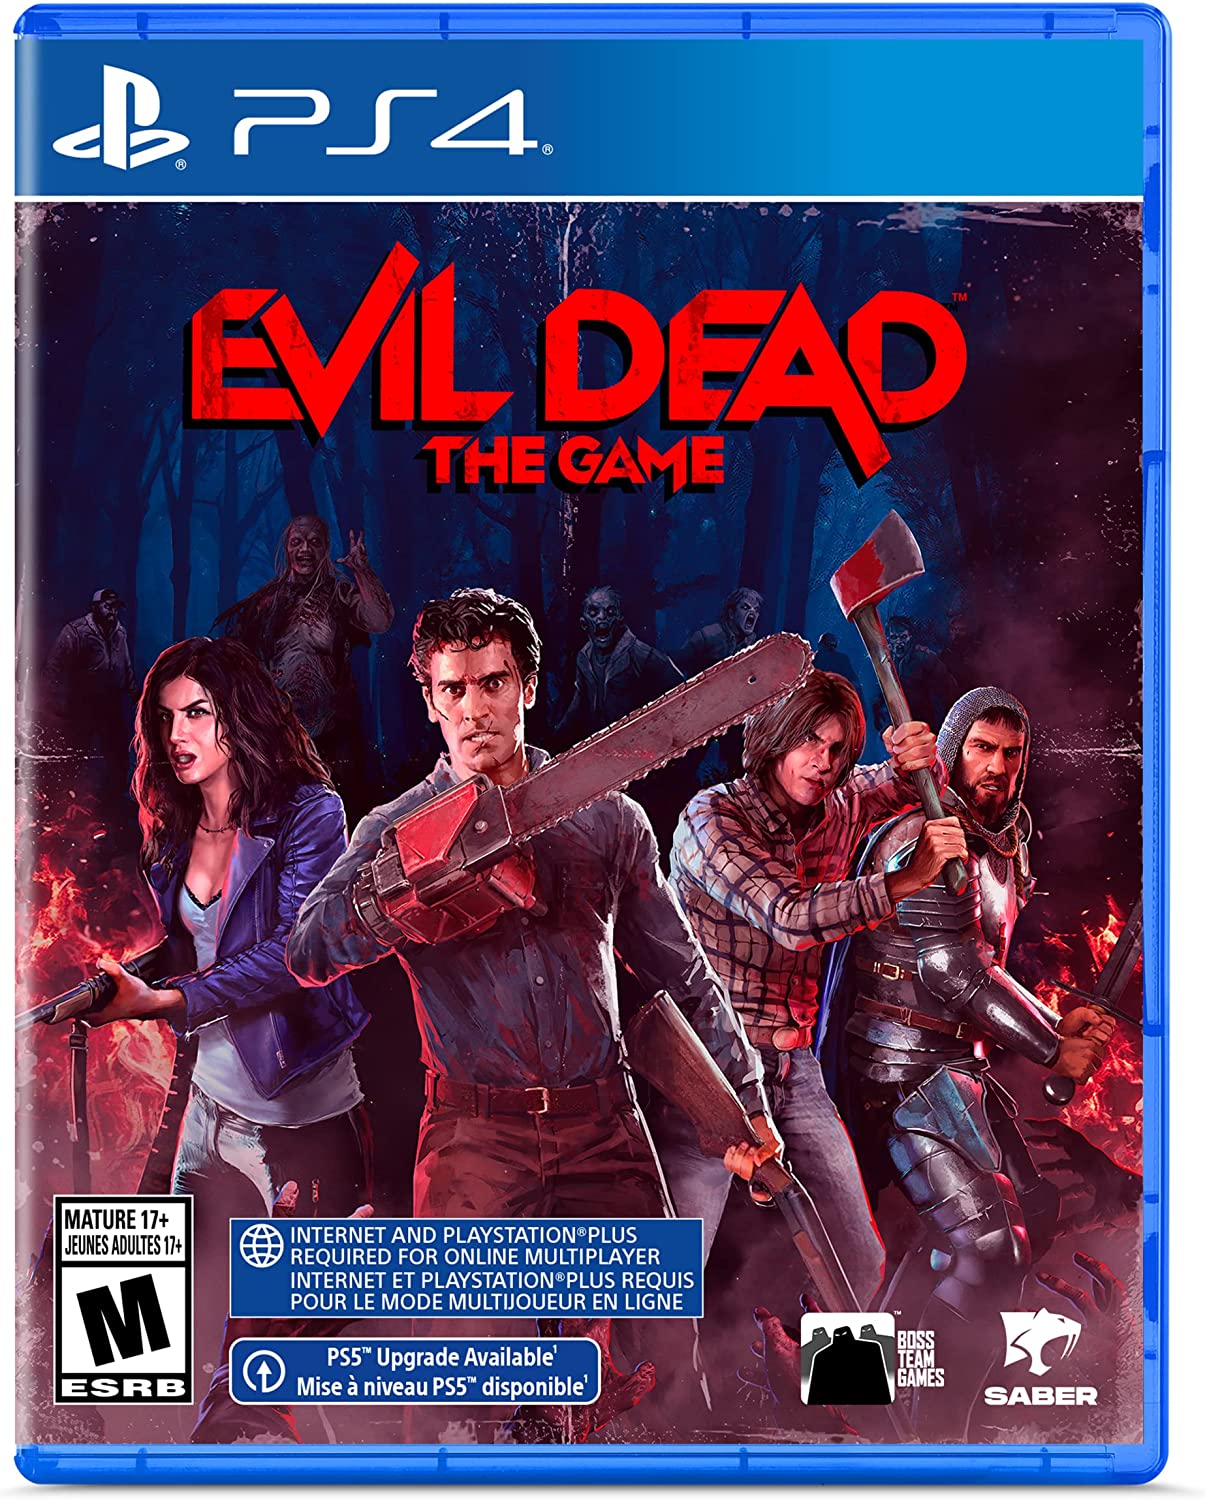 Evil Dead: The Game (PlayStation 5)